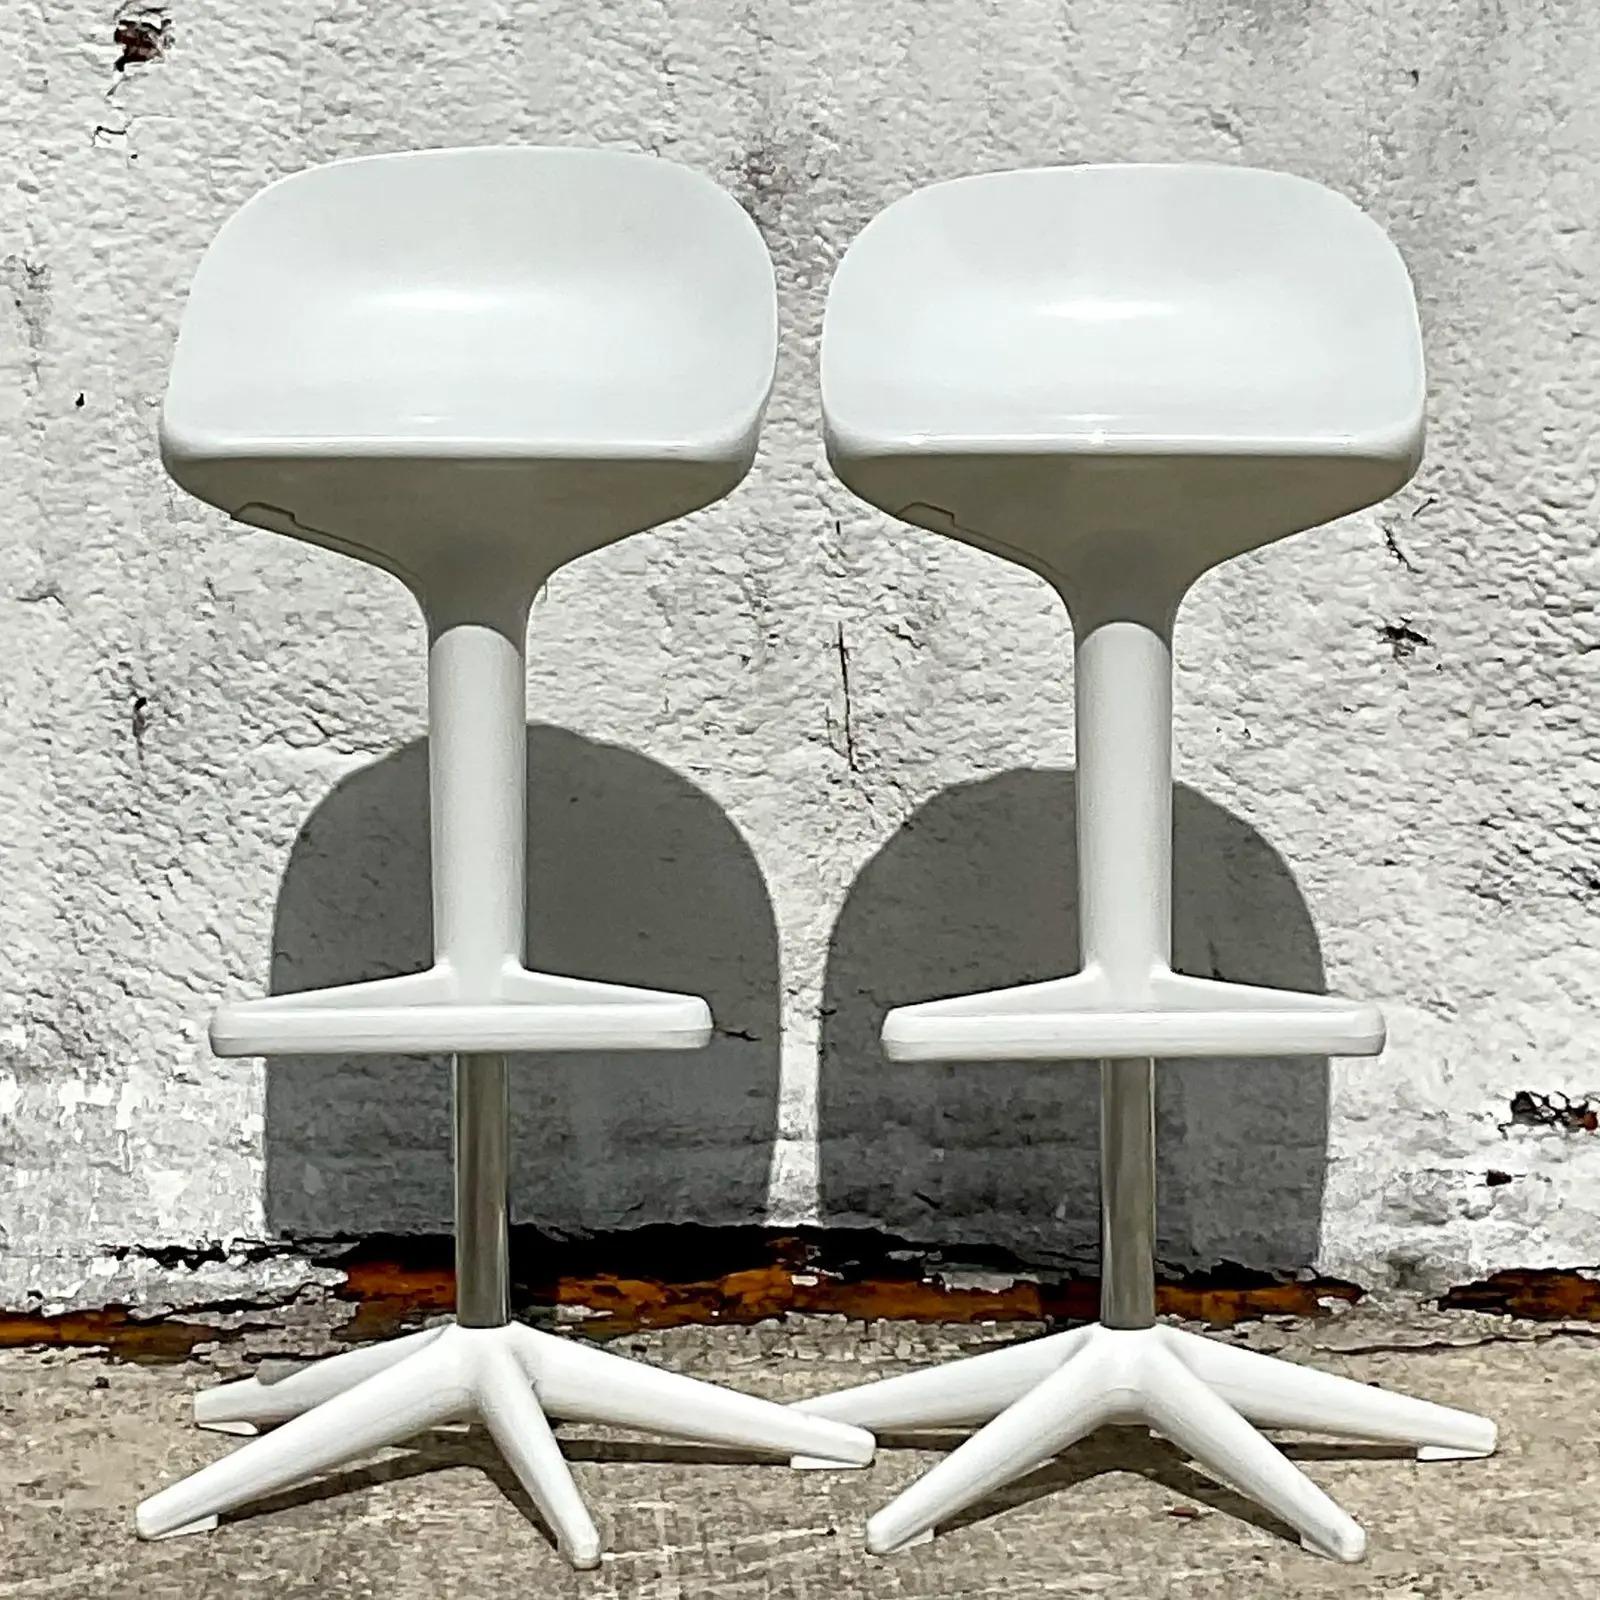 Chrome Vintage Contemporary Spool Stool by Antonio Citterio for Kartell - a Pair For Sale